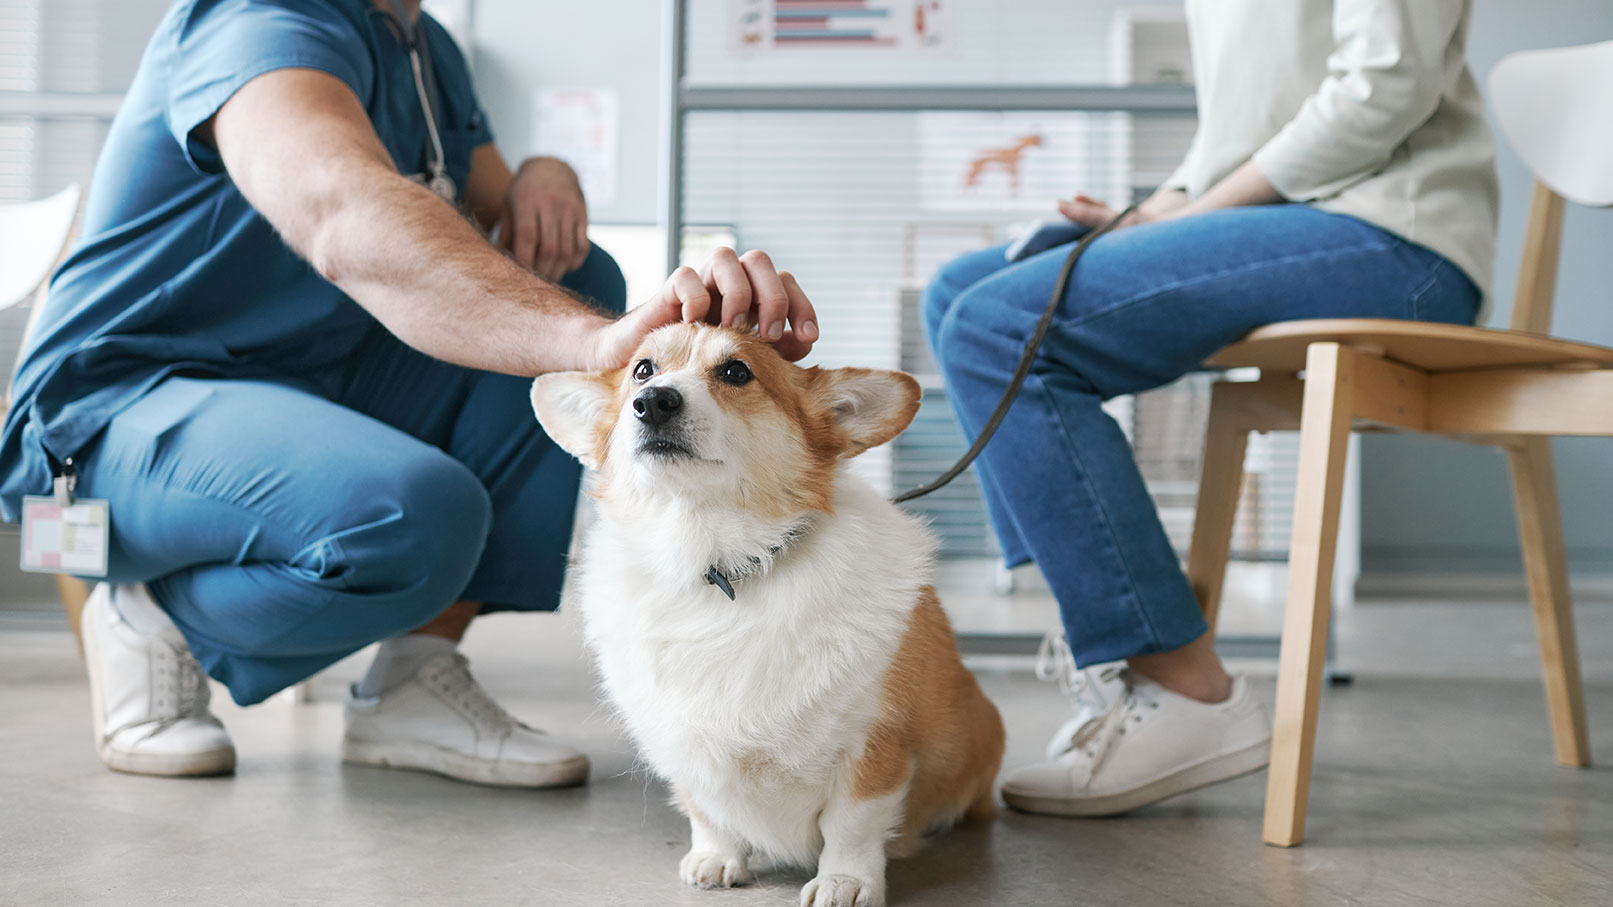 Saving at the vet: how to keep your furry friends from breaking the bank